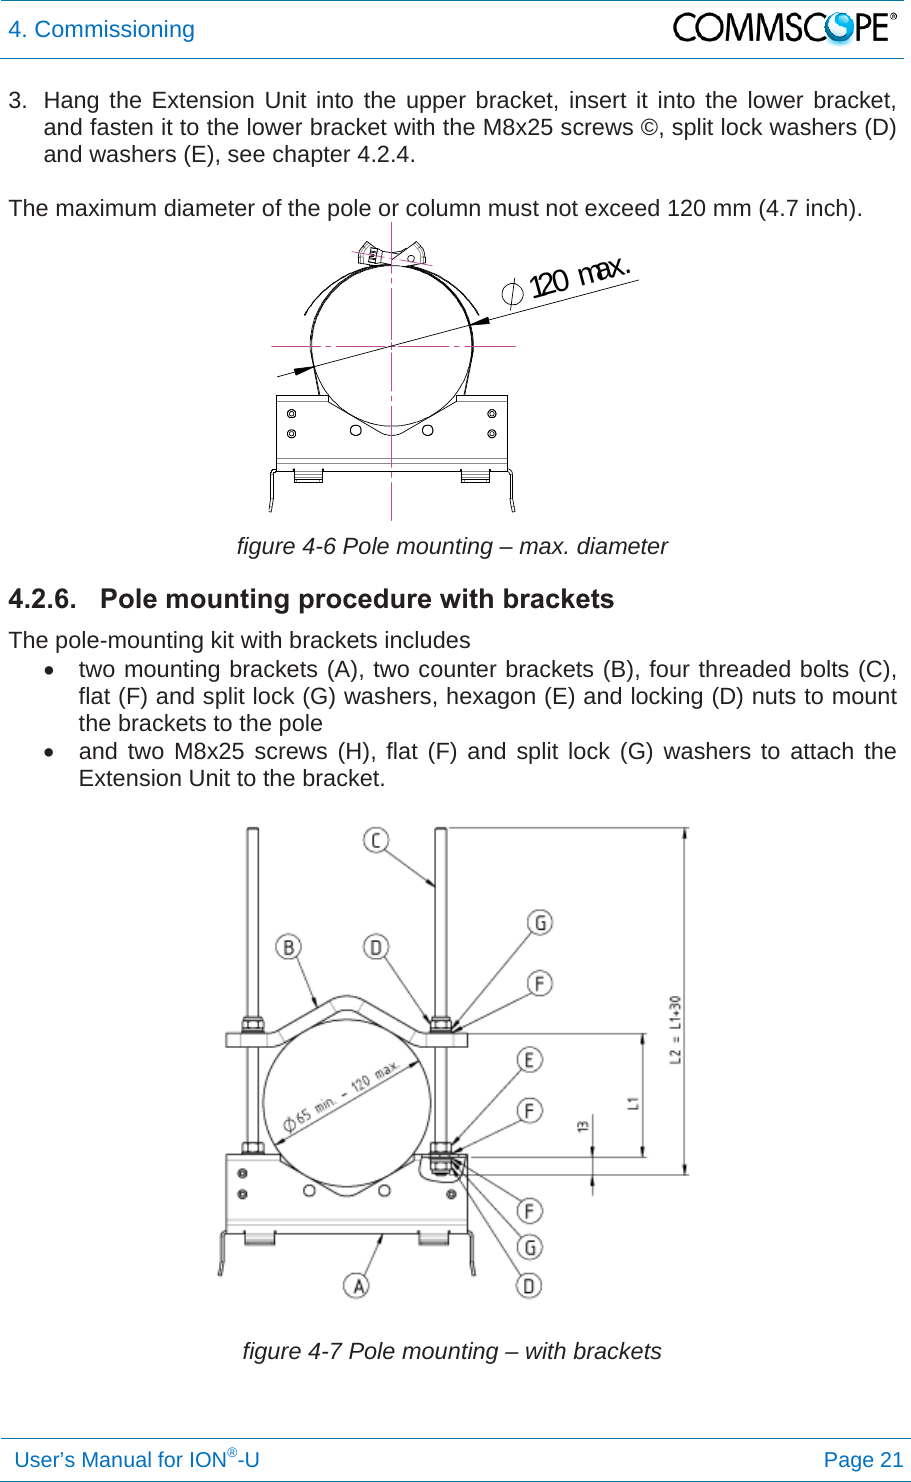 4. Commissioning   User’s Manual for ION®-U Page 21 3.  Hang the Extension Unit into the upper bracket, insert it into the lower bracket, and fasten it to the lower bracket with the M8x25 screws ©, split lock washers (D) and washers (E), see chapter 4.2.4.  The maximum diameter of the pole or column must not exceed 120 mm (4.7 inch).  figure 4-6 Pole mounting – max. diameter 4.2.6.  Pole mounting procedure with brackets The pole-mounting kit with brackets includes   two mounting brackets (A), two counter brackets (B), four threaded bolts (C), flat (F) and split lock (G) washers, hexagon (E) and locking (D) nuts to mount the brackets to the pole   and two M8x25 screws (H), flat (F) and split lock (G) washers to attach the Extension Unit to the bracket.  figure 4-7 Pole mounting – with brackets 120max.